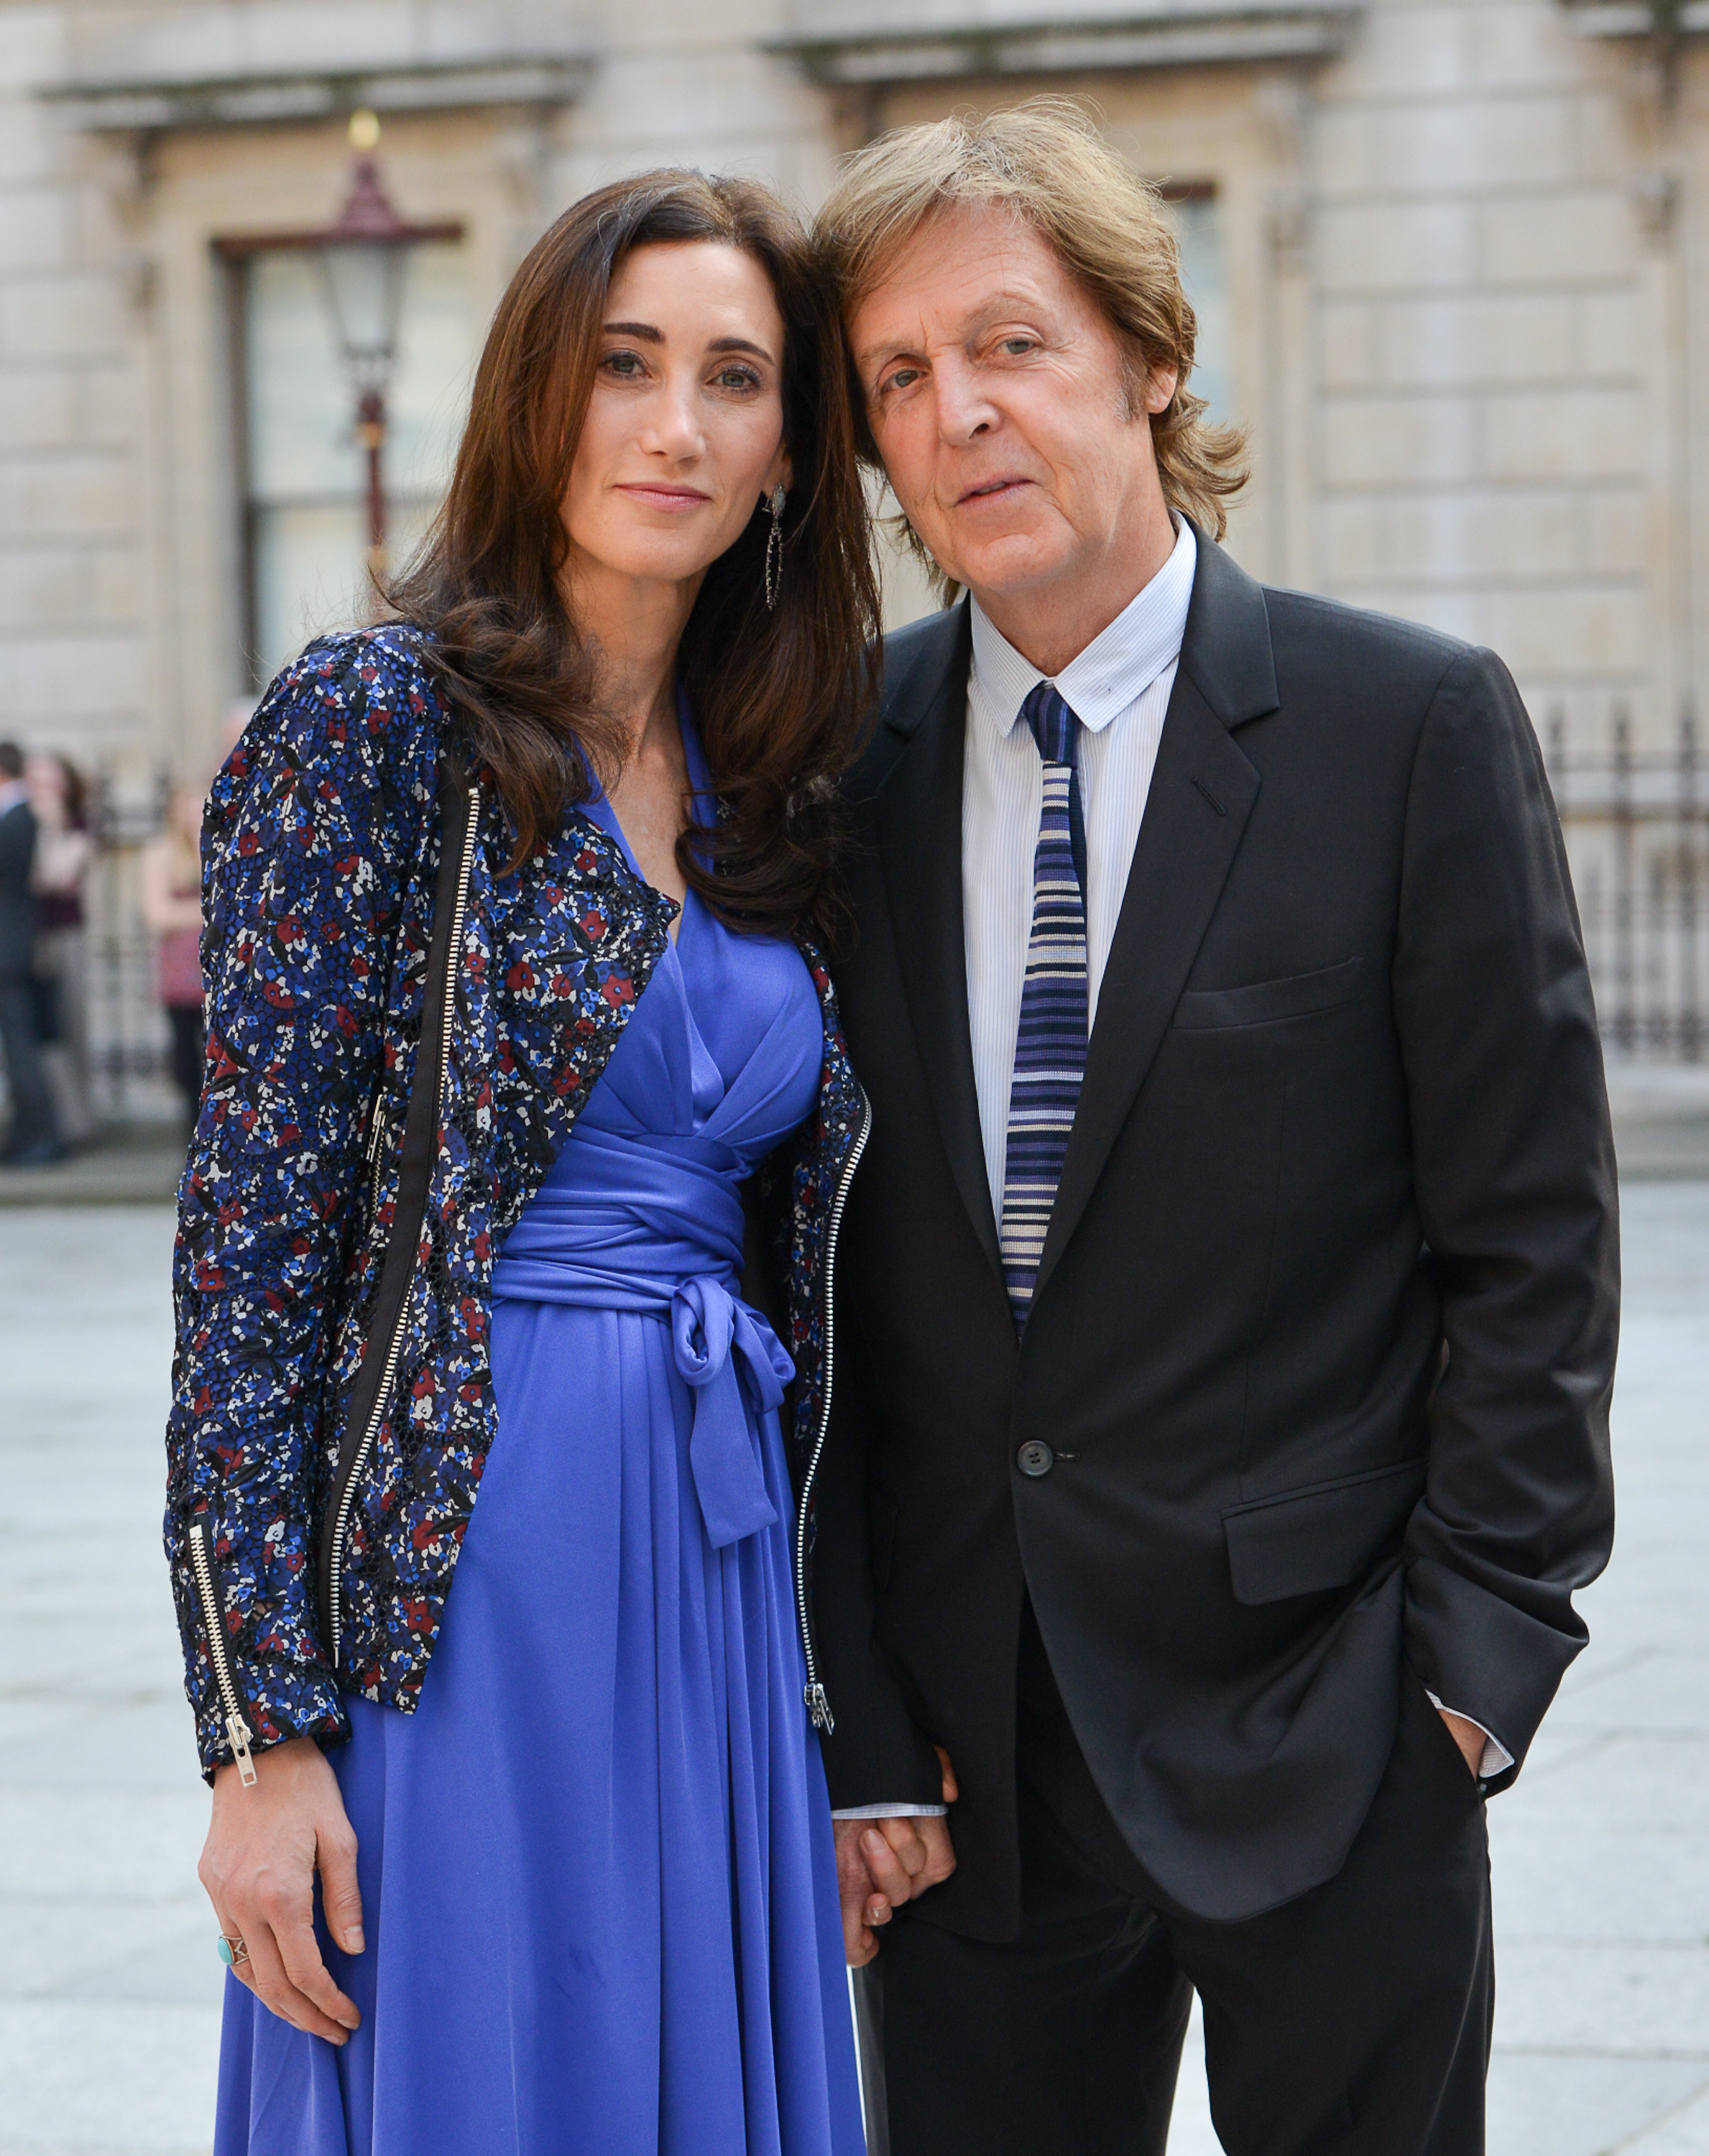 Nancy Shevell and Sir Paul McCartney at A Celebration of the Arts at Royal Academy of Arts in 2012